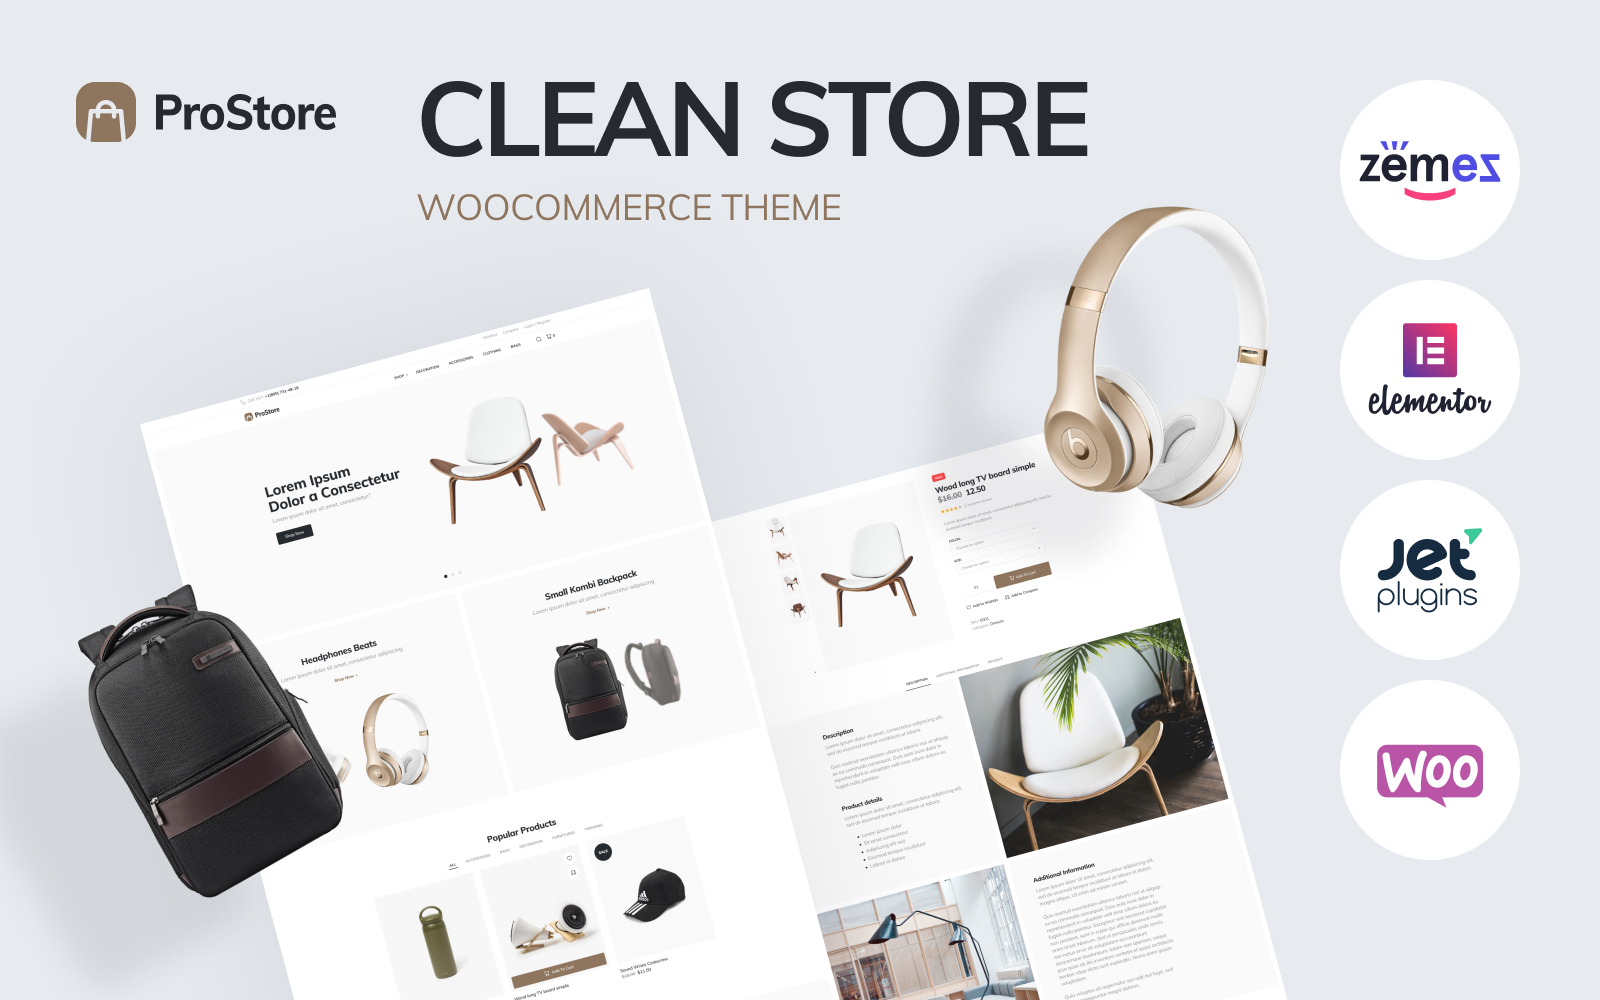 ProStore - clean store template for WooCommerce with Elementor  WooCommerce Theme